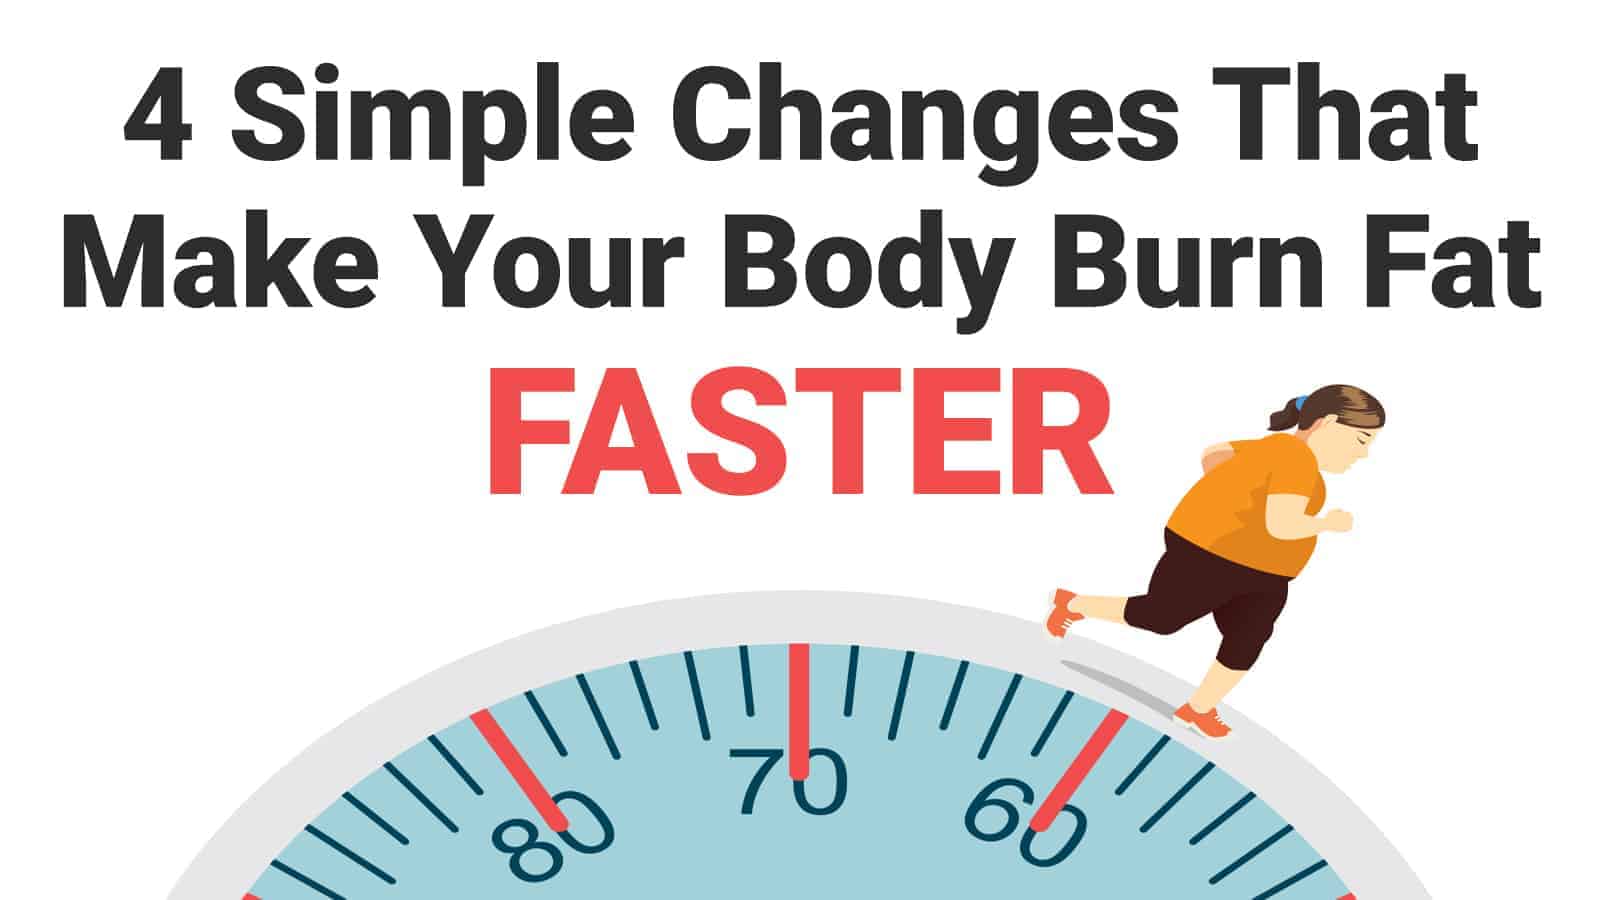 4 Simple Changes That Make Your Body Burn Fat Faster